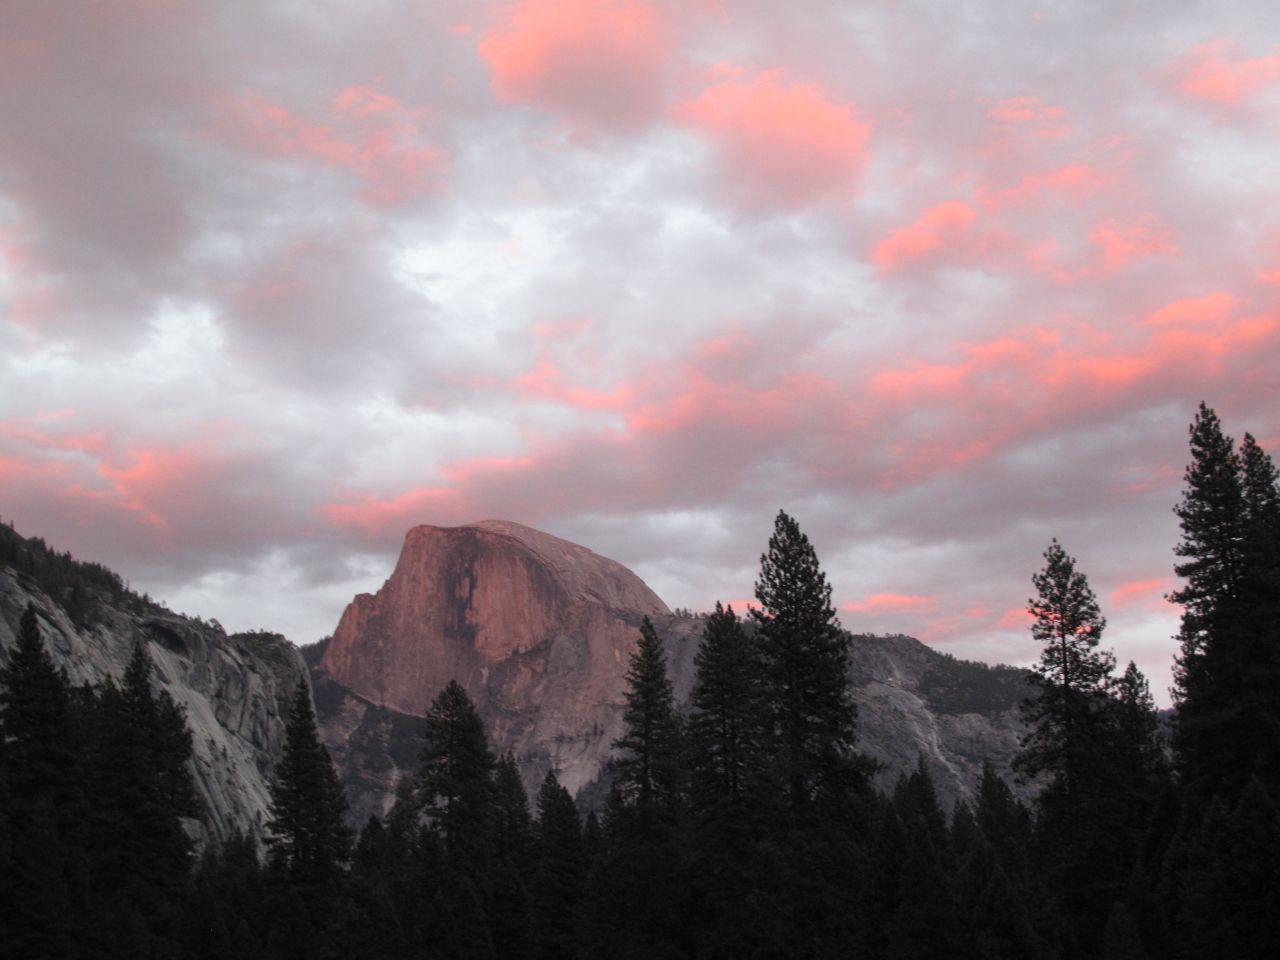 A view of Half Dome from Cook's Meadow shows the glorious colors at sunset.